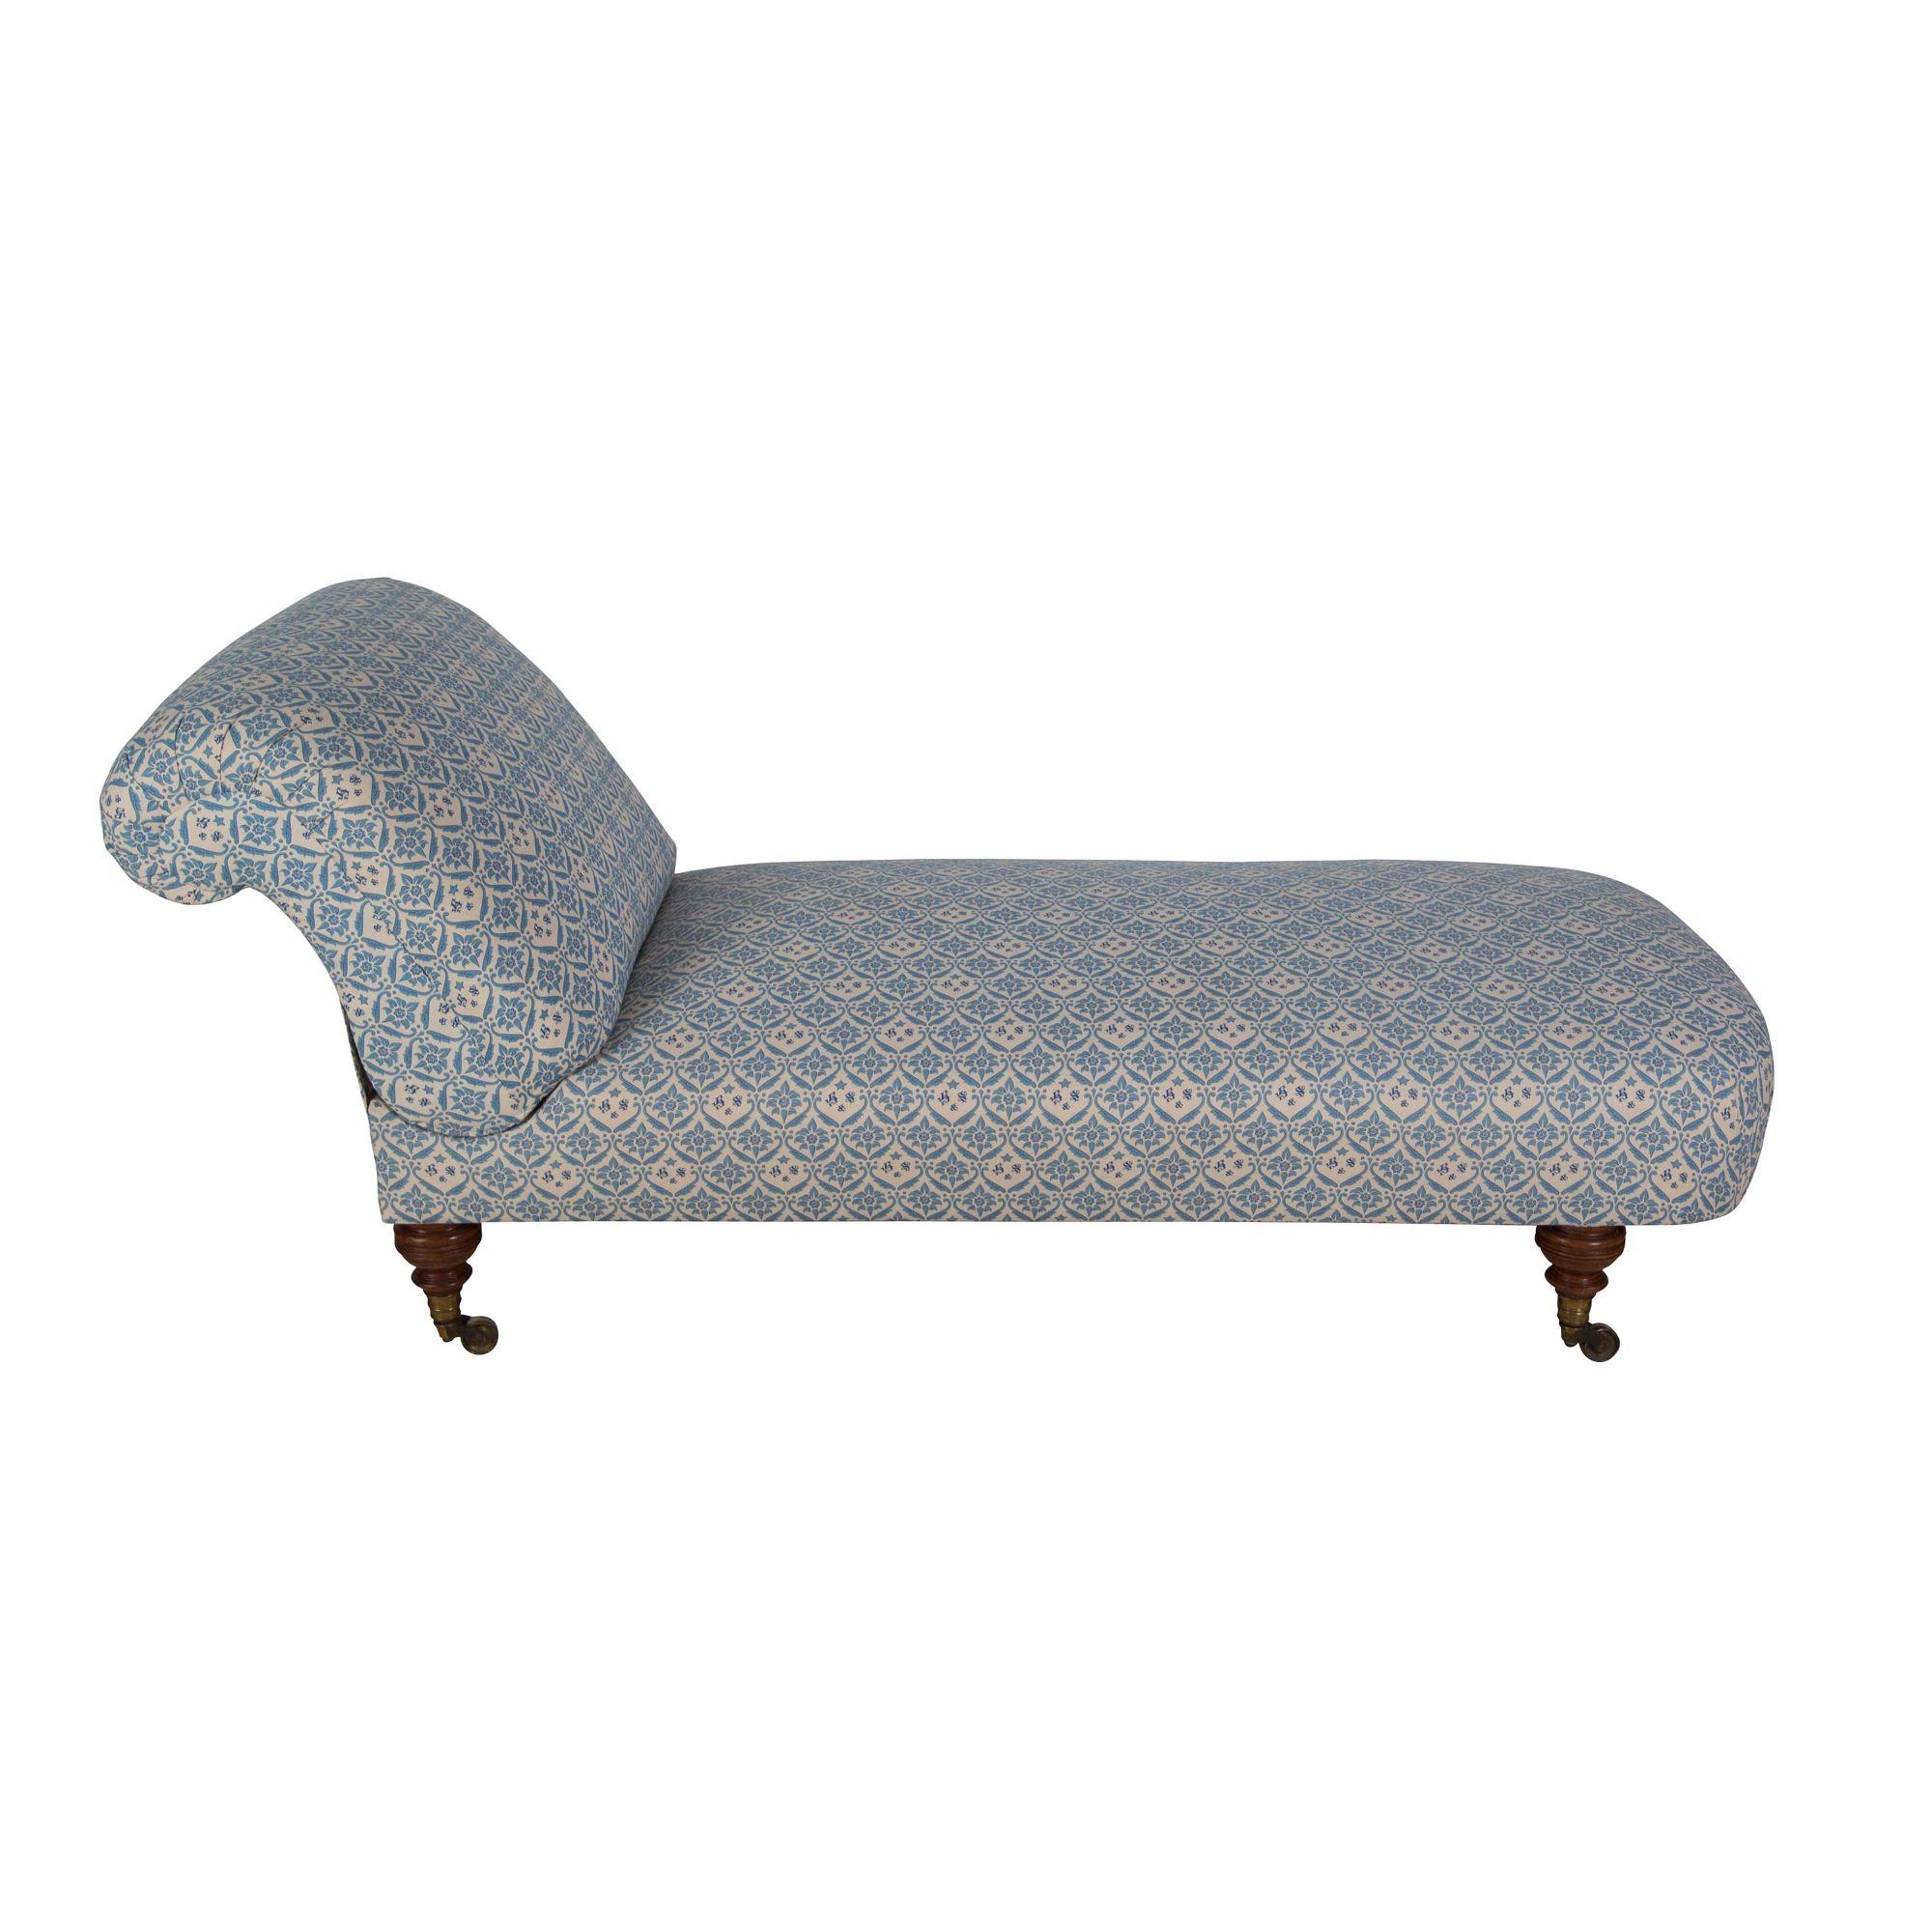 An exceptional and rare Howard & Sons drop back daybed, restored and upholstered in H&S blue ticking, raised on finely turned walnut tapered legs with original stamped castors and one leg stamped with the 7 digit identification number (64116684)